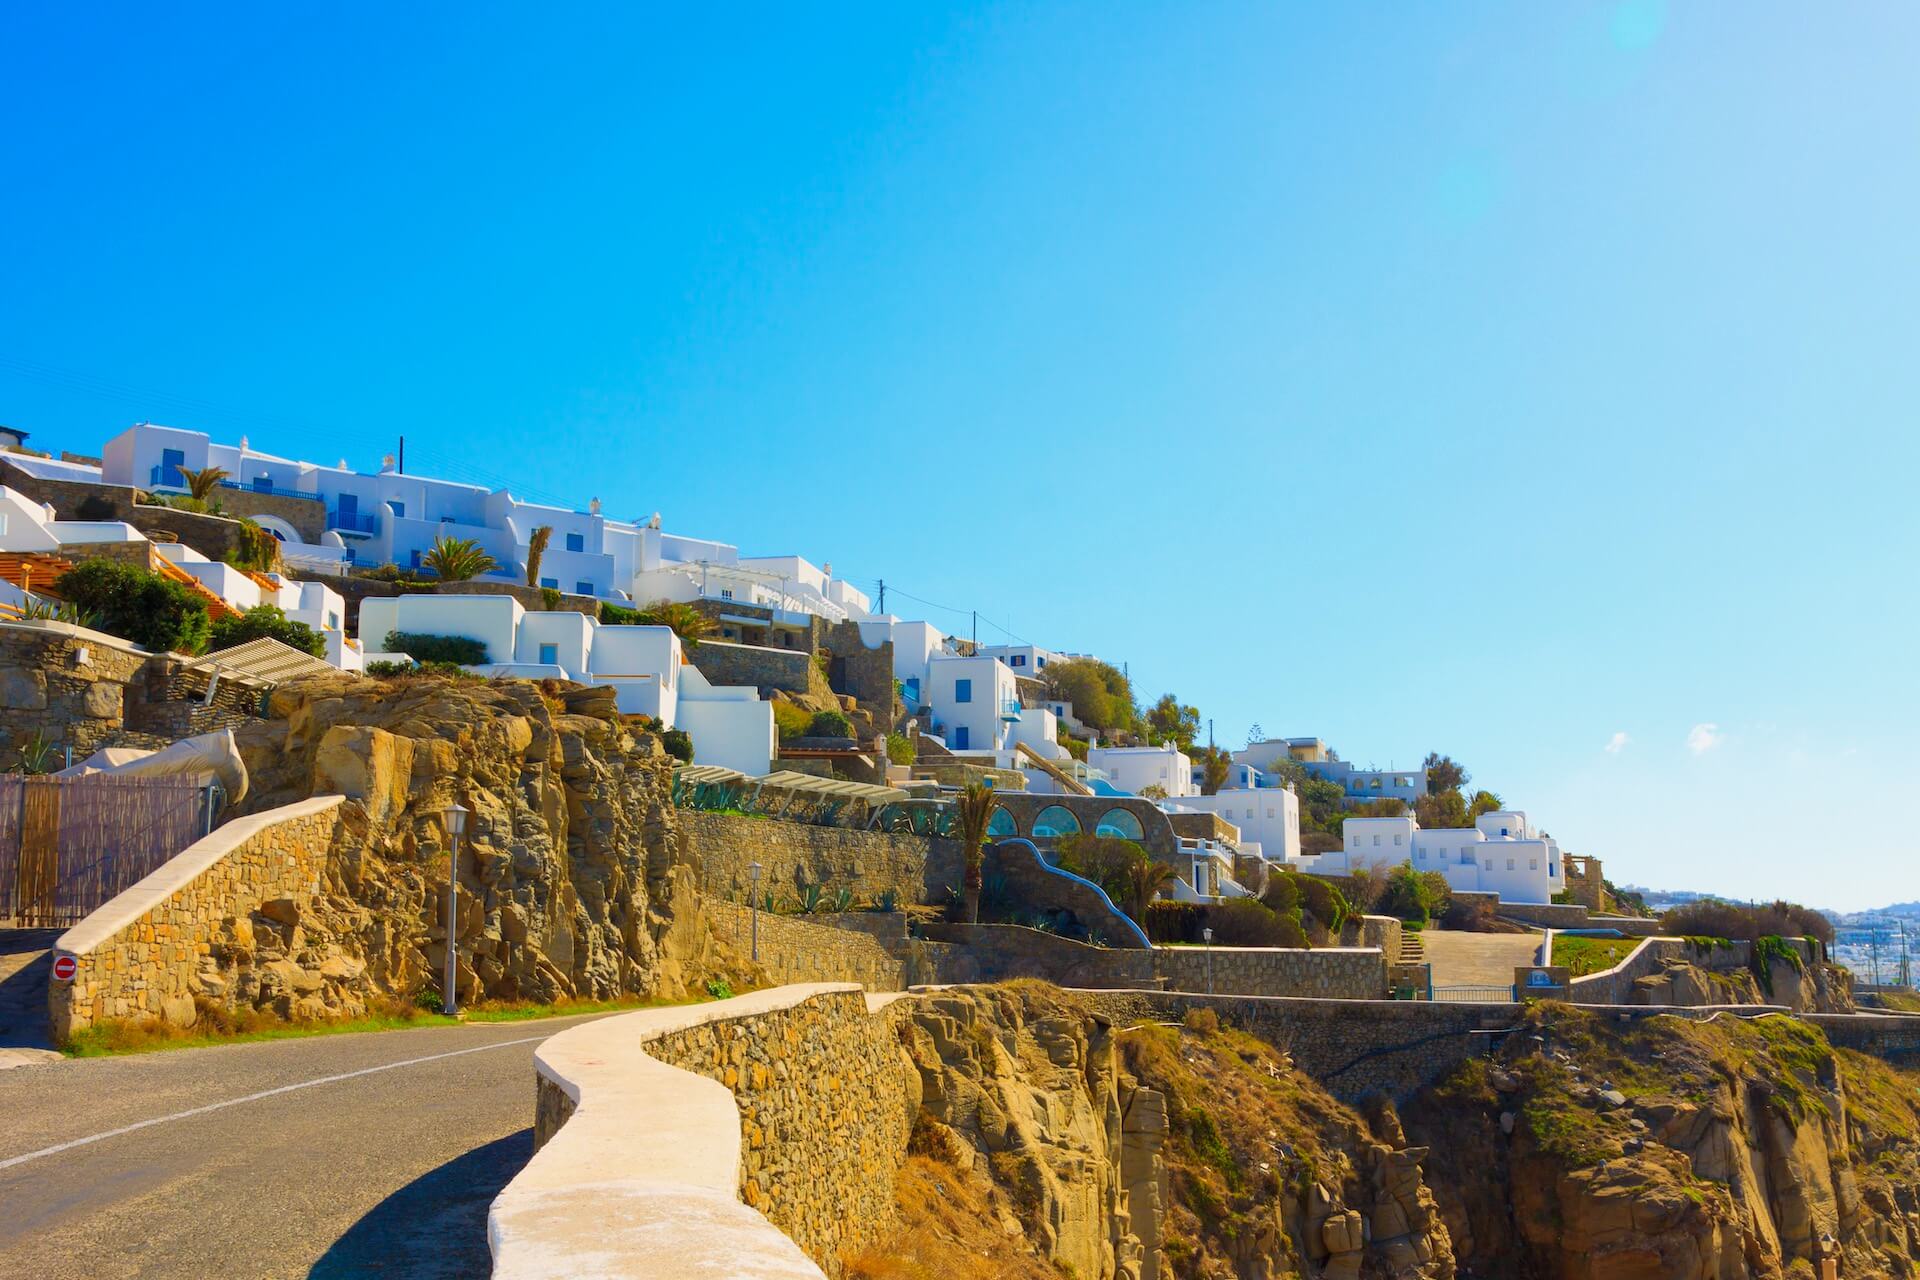 A view of some white buildings in Mykonos from the road